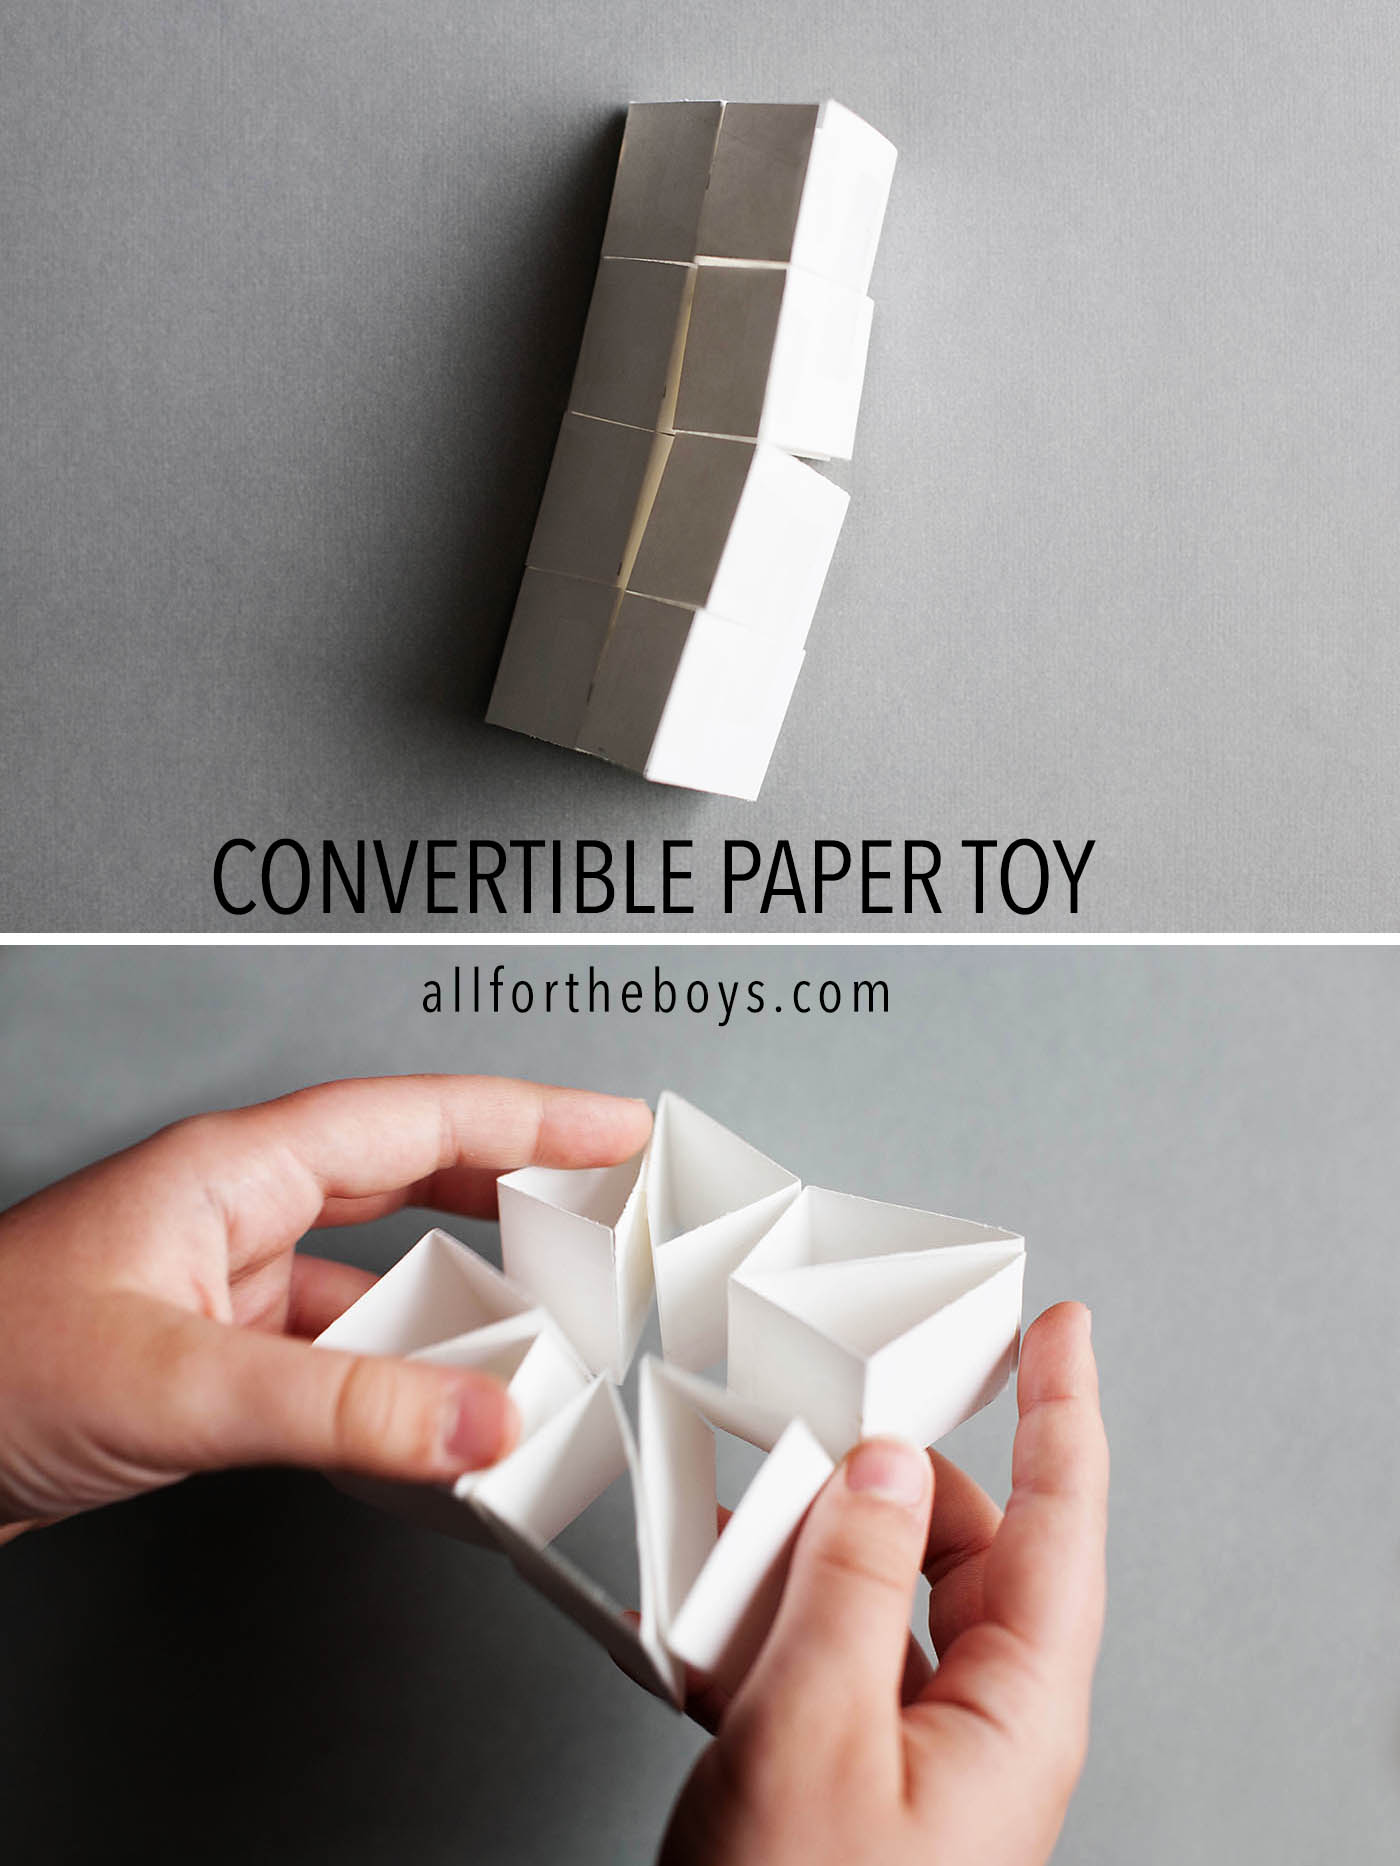 Convertible paper toy